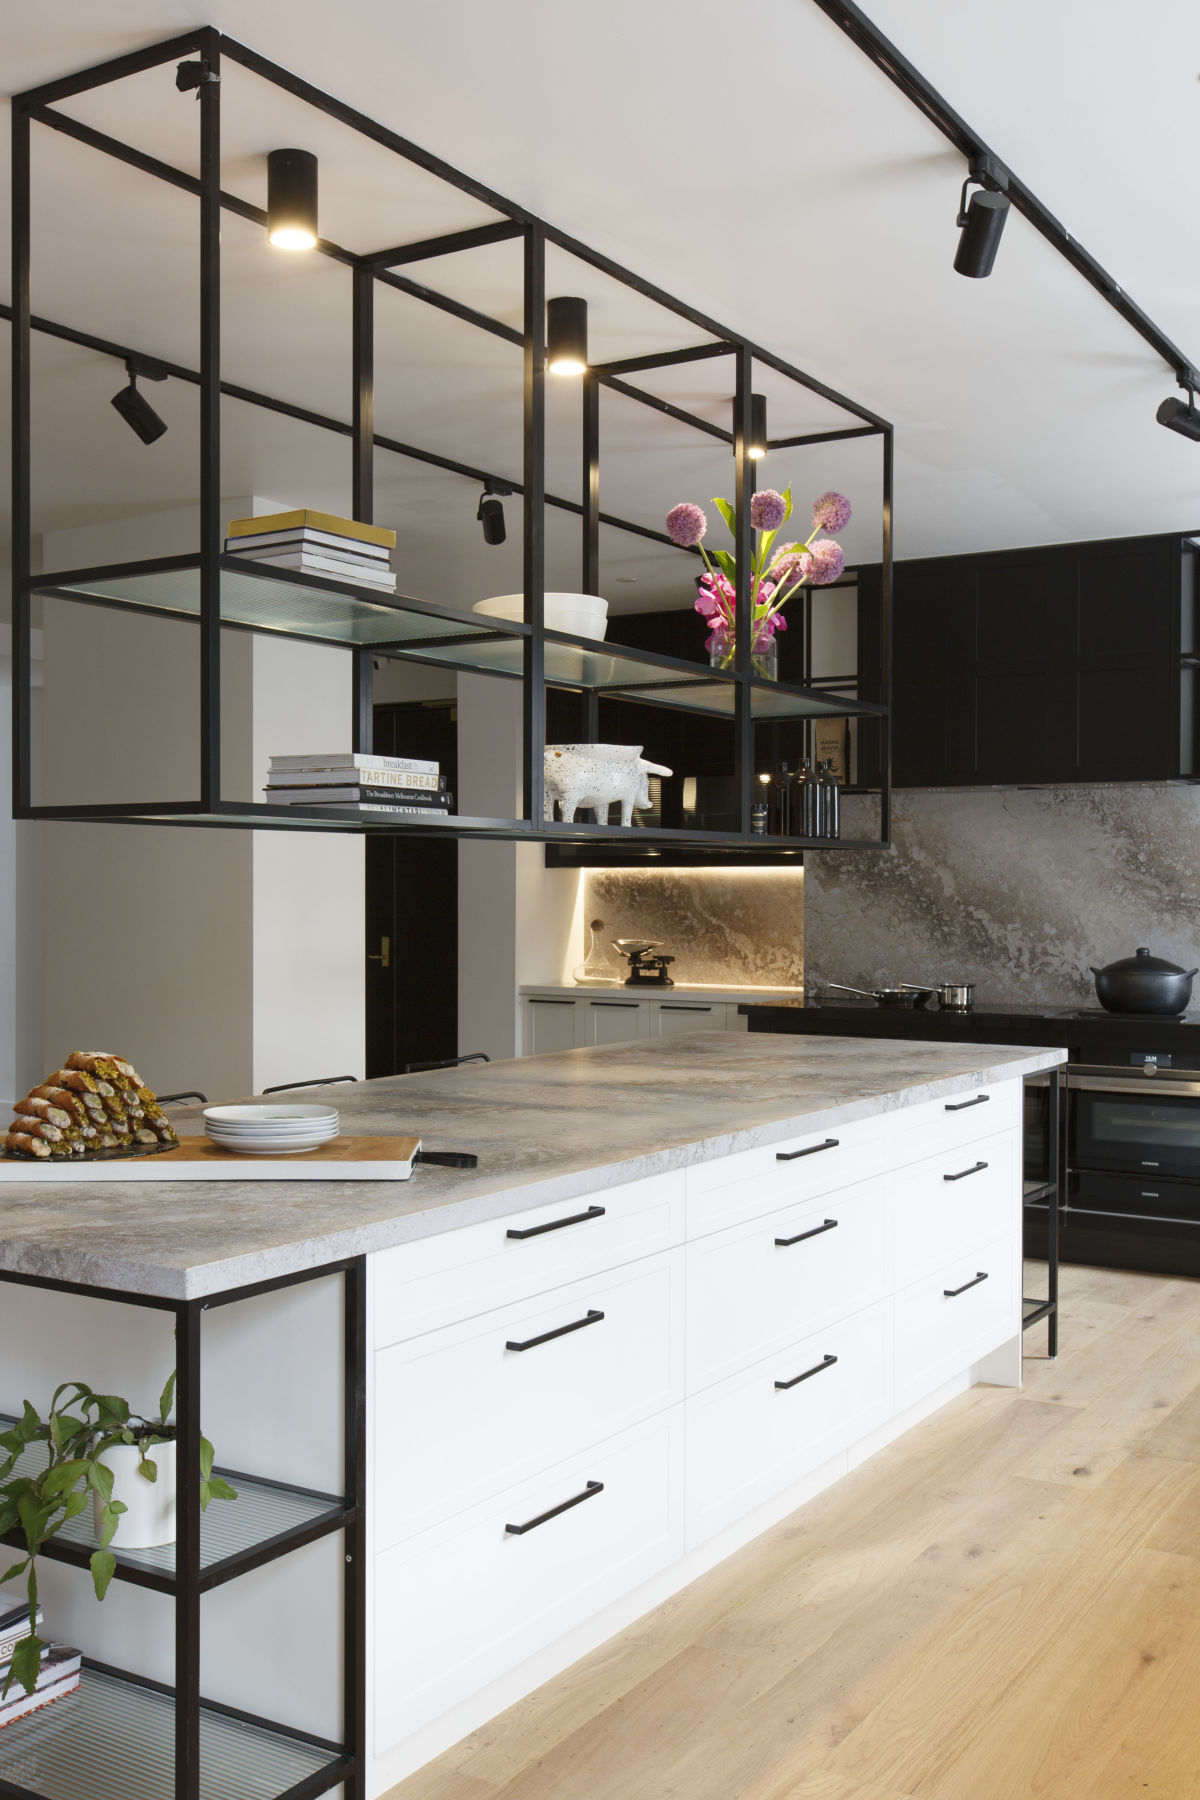 Challenge Kitchen Showstopper Showcases Contemporary Café-style ...